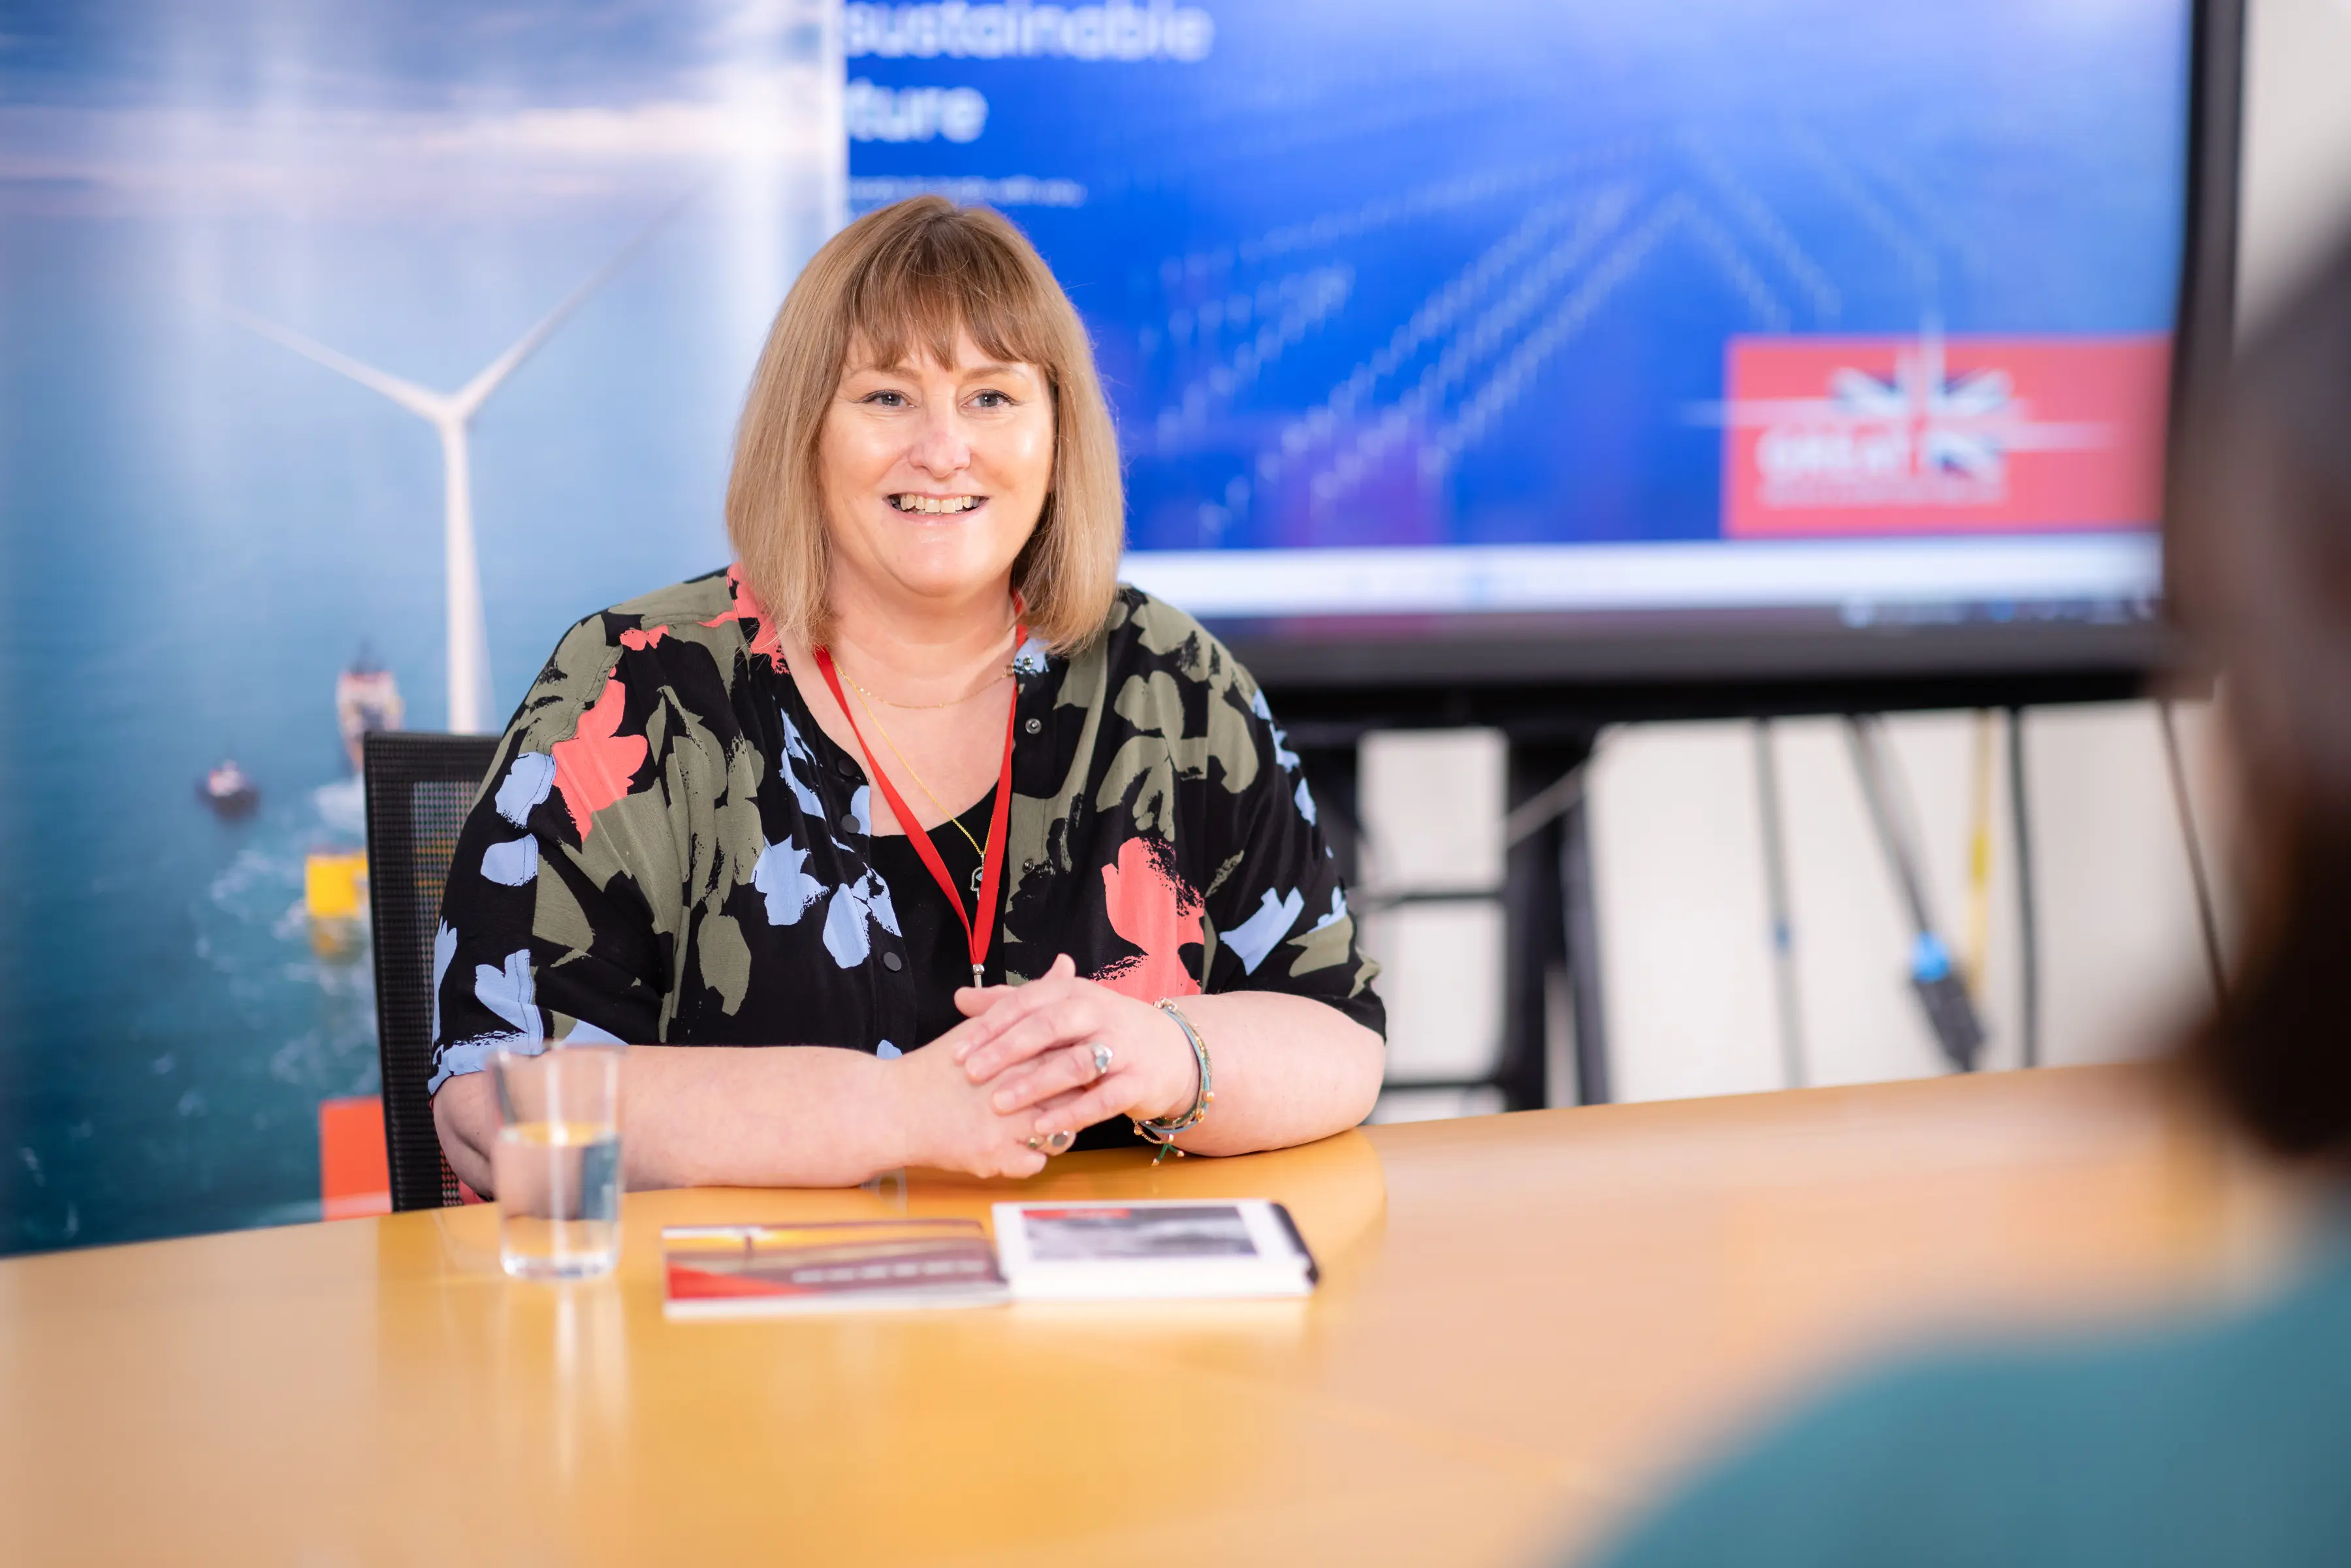 Maintaining Inclusivity with Core Objectives Establishing Offshore Wind Safety on a Global Scale_Interview with Sarah Albon, Chief Executive, Health and Safety Executive (HSE)